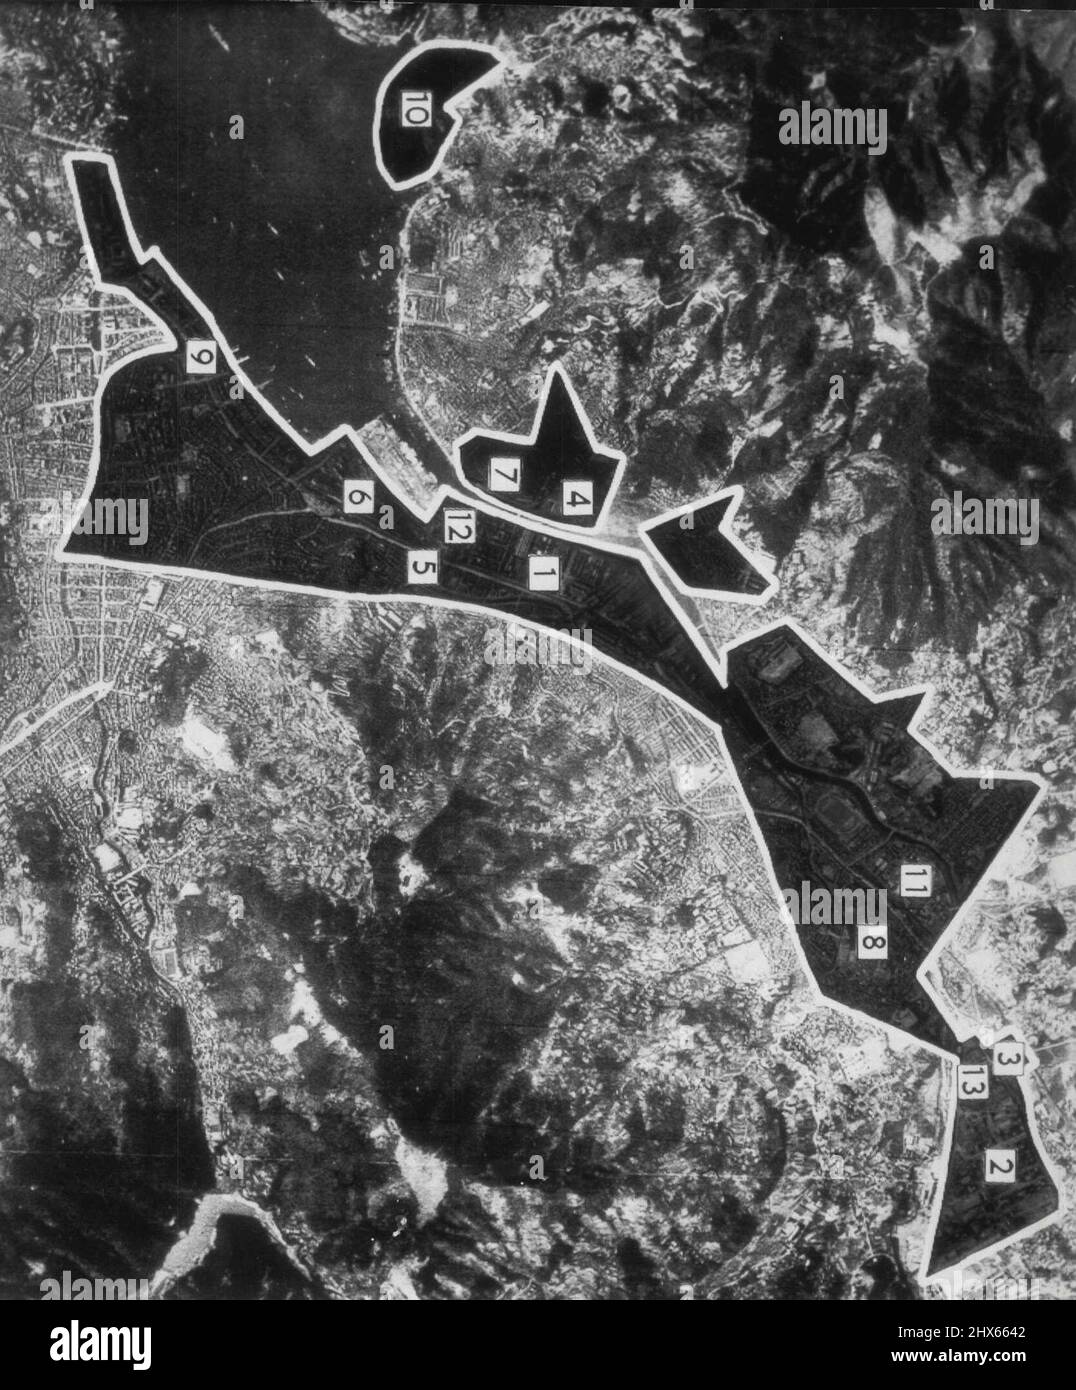 Diagram Of Nagasaki Damage -- Shaded sections on this pre-strike aerial picture of Nagasaki, Japan, represent atomic bomb-damaged areas assessed by army air forces after August 9 Raid. Legend: 1-Mitsubishi Steel and Iron Works, probably 100 per cent destroyed: 2-Ordnance plant, 30-70%: 3-branch gas works, 90%: 4-Mitsubishi woodworking plant, 100%: 5-Kyushu gas works, 50%: 6-Nagasaki rail station and freight yards, 20%: 7-steam power plant, 90%: 8-prison, probably 100%: 9-Dejima wharves, 25%; 10- Stock Photo